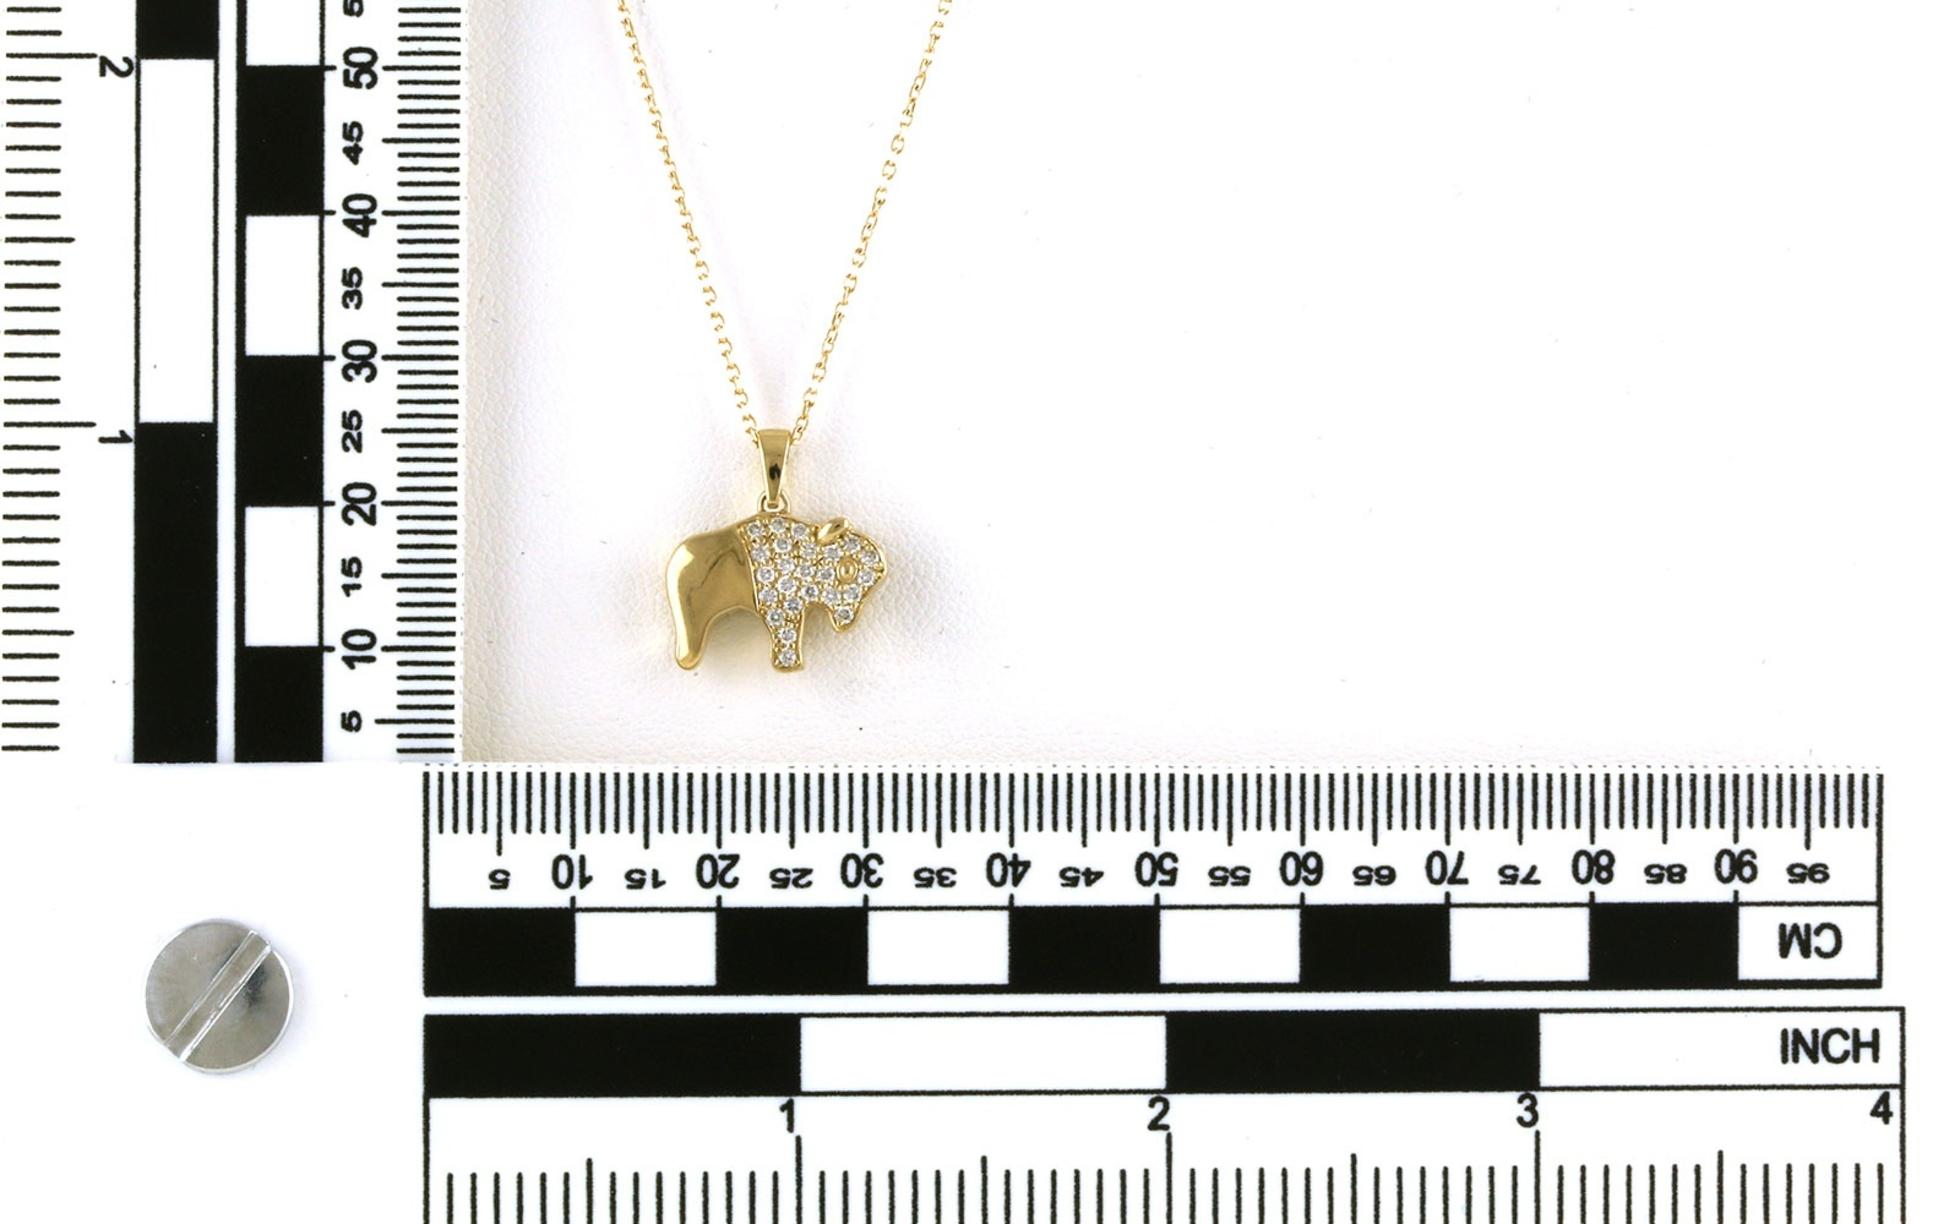 Buffalo Pave Diamond Necklace in Yellow Gold (0.23cts TWT) scale